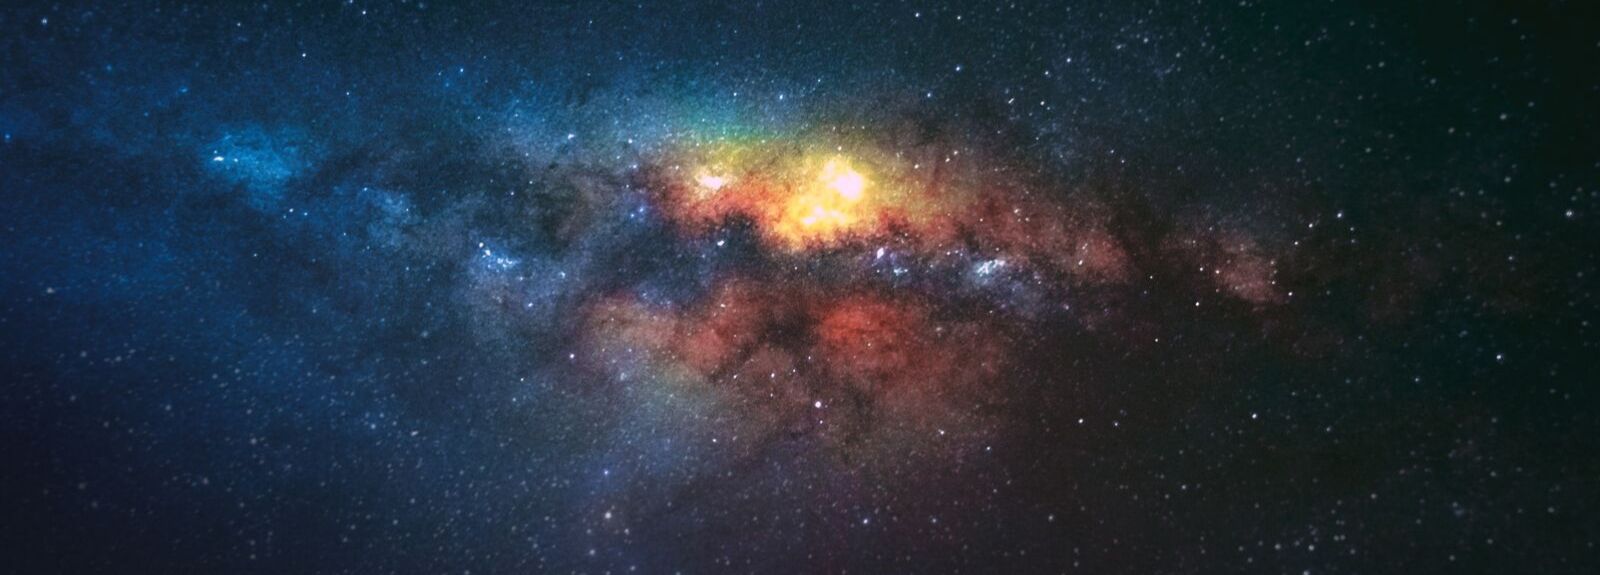 Colourful image of space